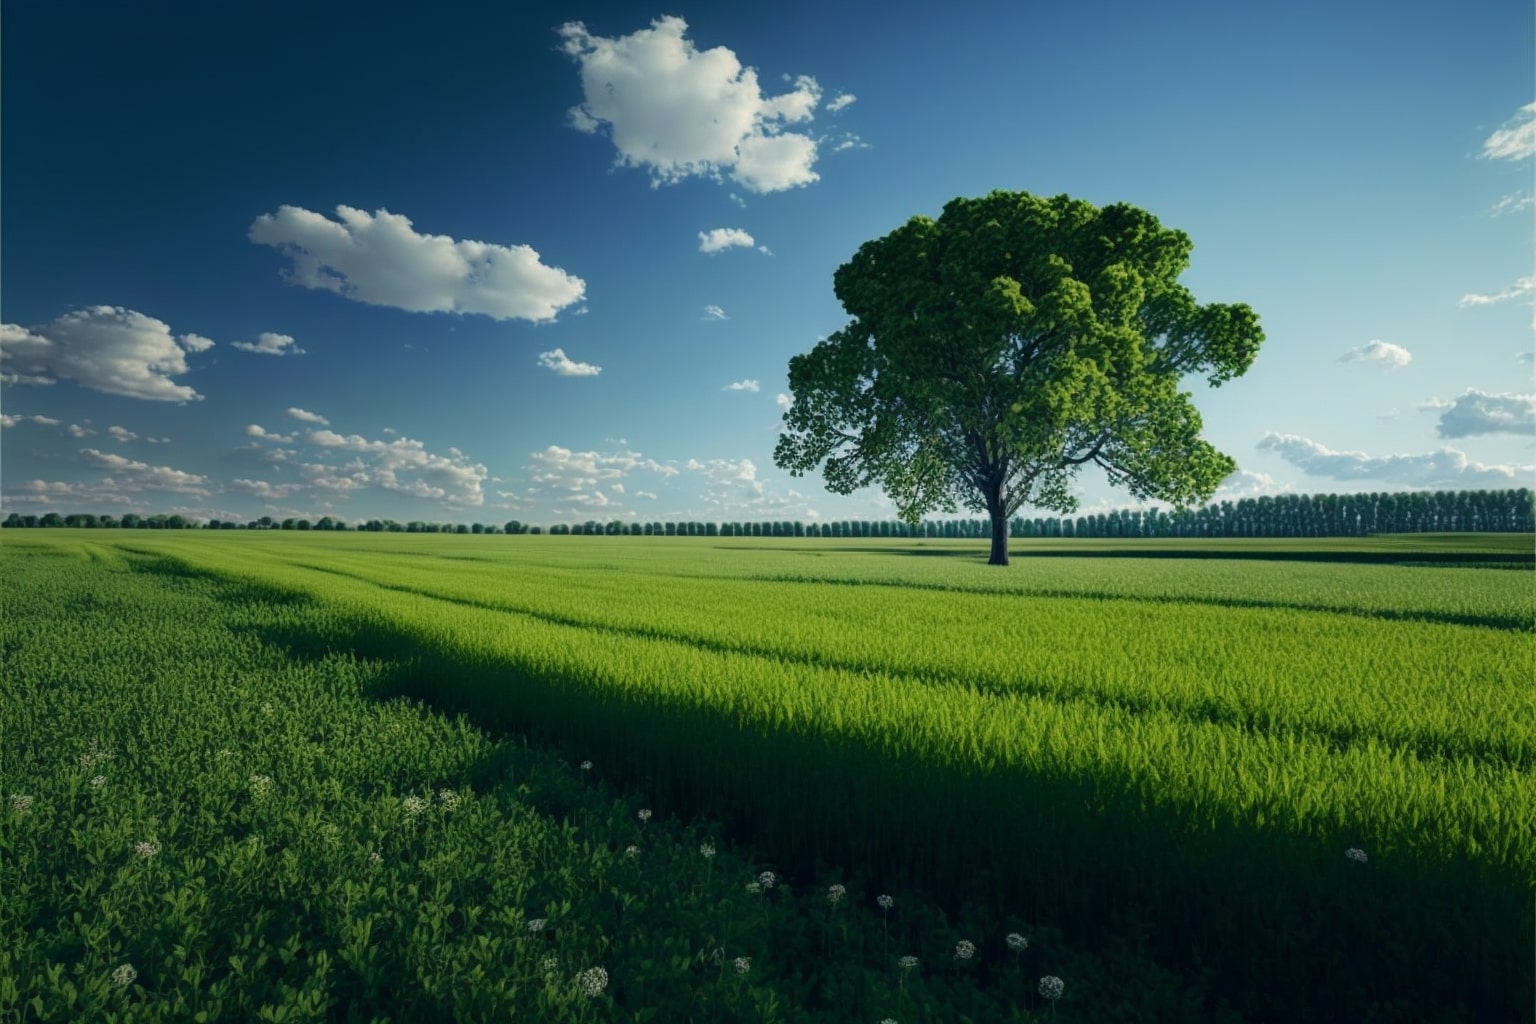 Lone tree stands in the middle of a green field.